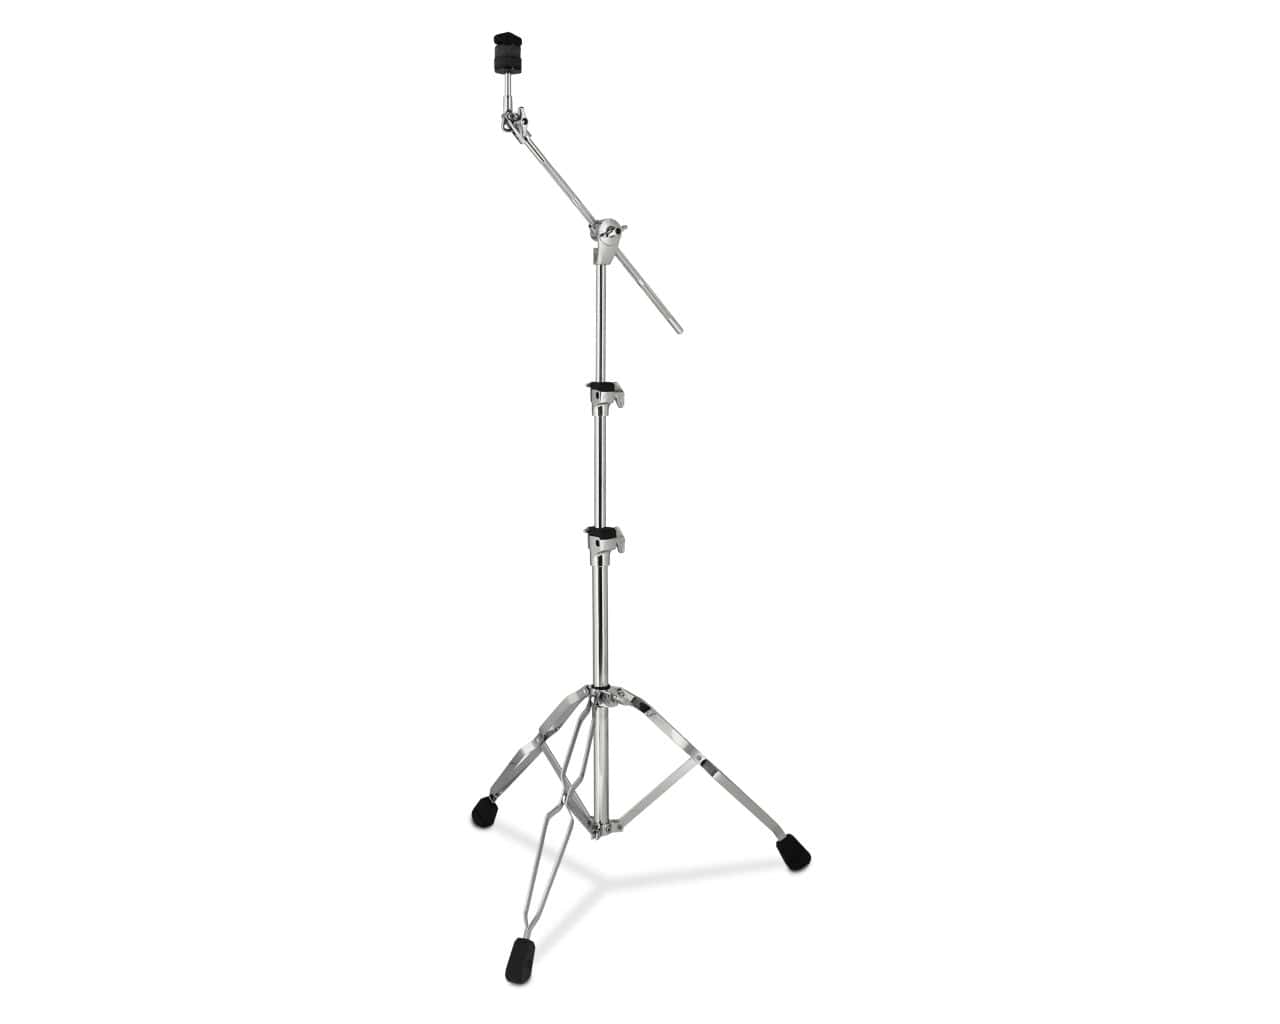 PDP BY DW 800 SERIES CYMBAL BOOM STANDS PDCB810 